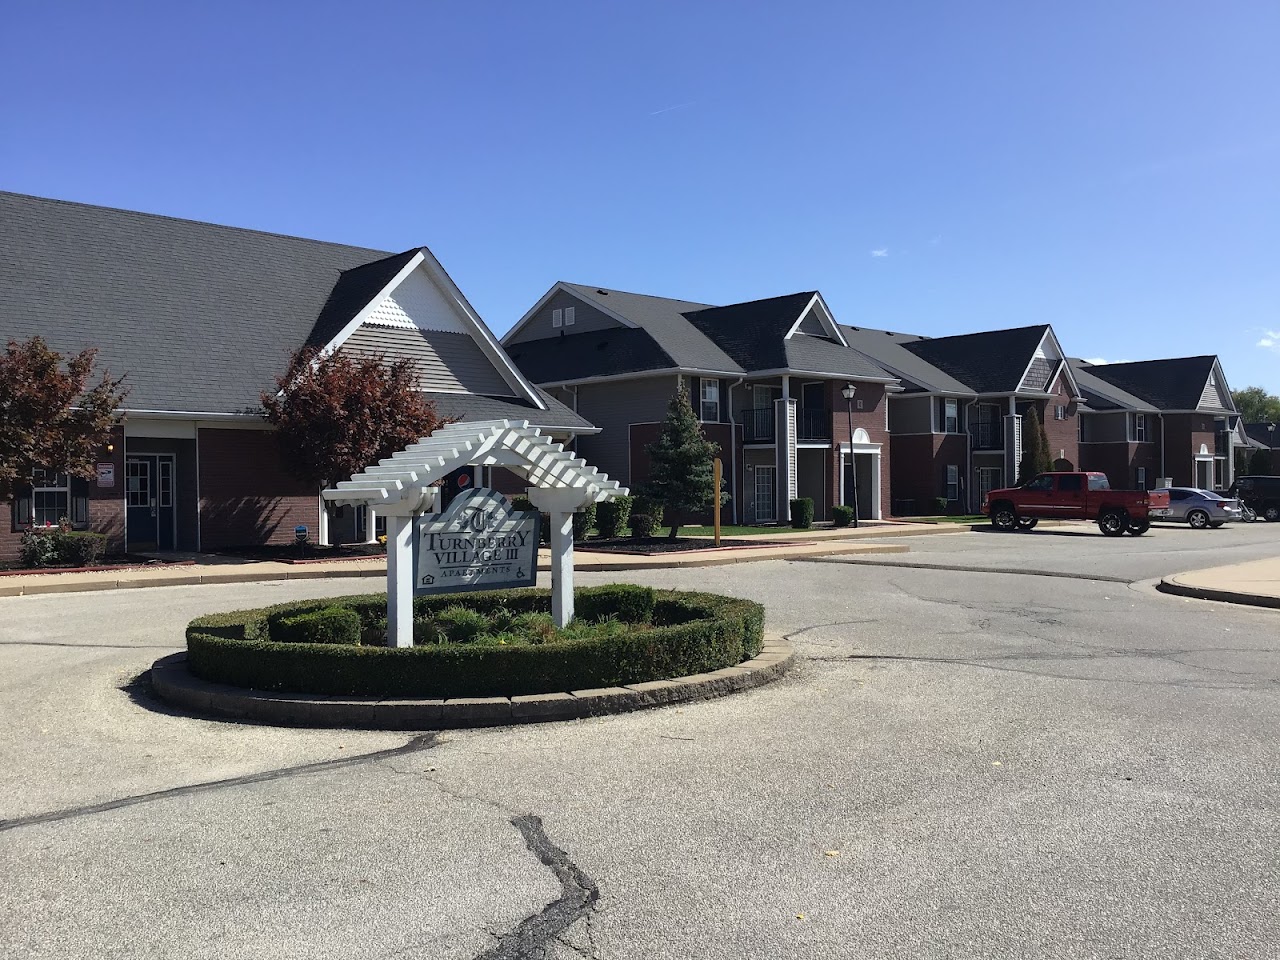 Photo of TURNBERRY VILLAGE MACOMB. Affordable housing located at 101 WIGWAM HOLLOW CIR MACOMB, IL 61455